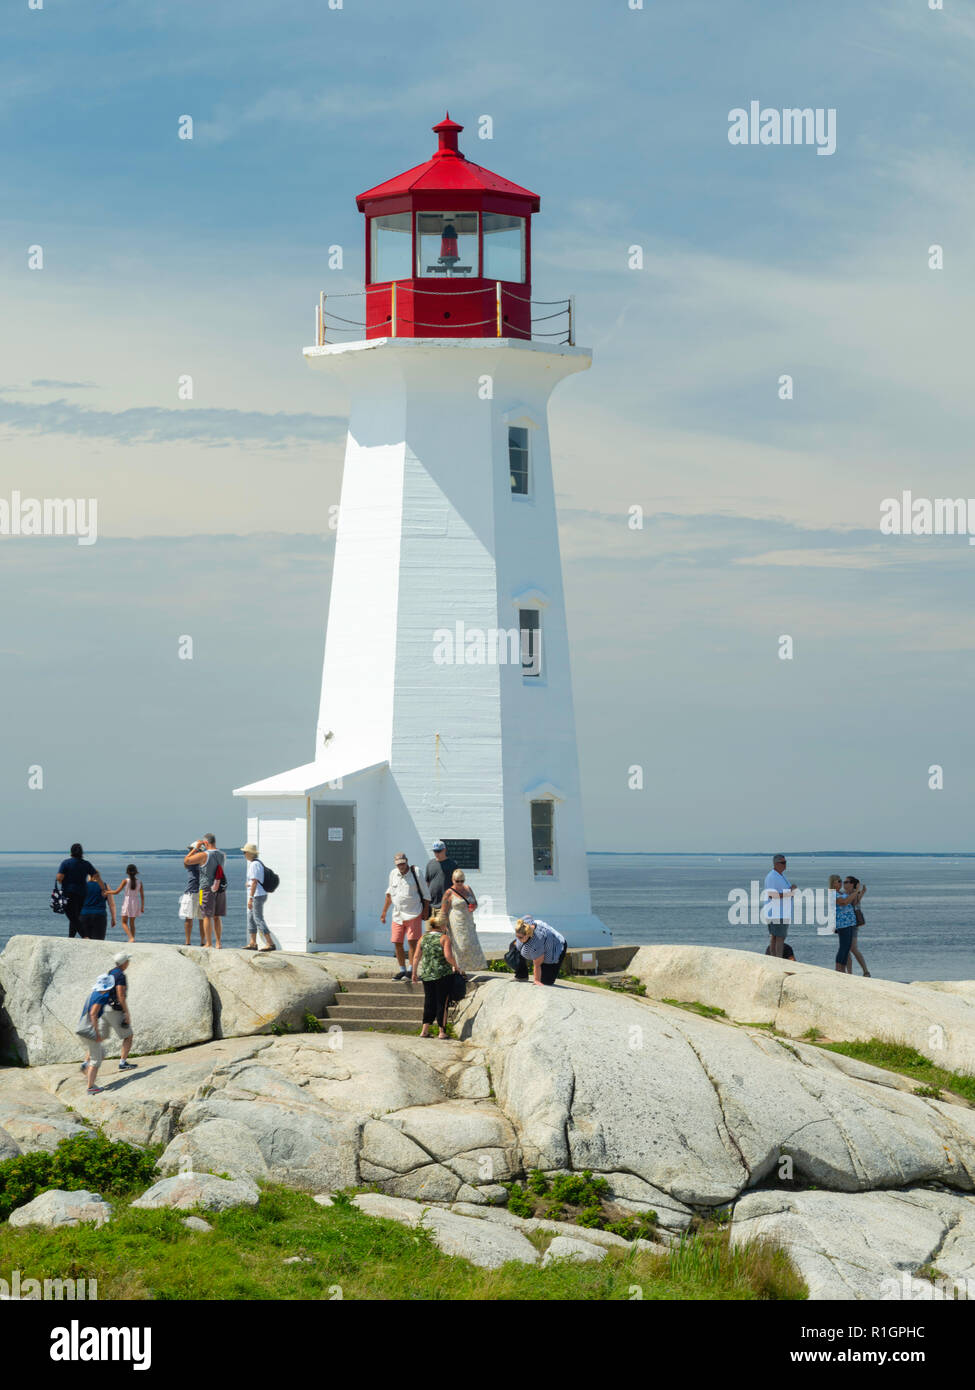 The famous Peggy's Point Lighthouse, Peggy's Cove, Nova Scotia, Canada. Stock Photo